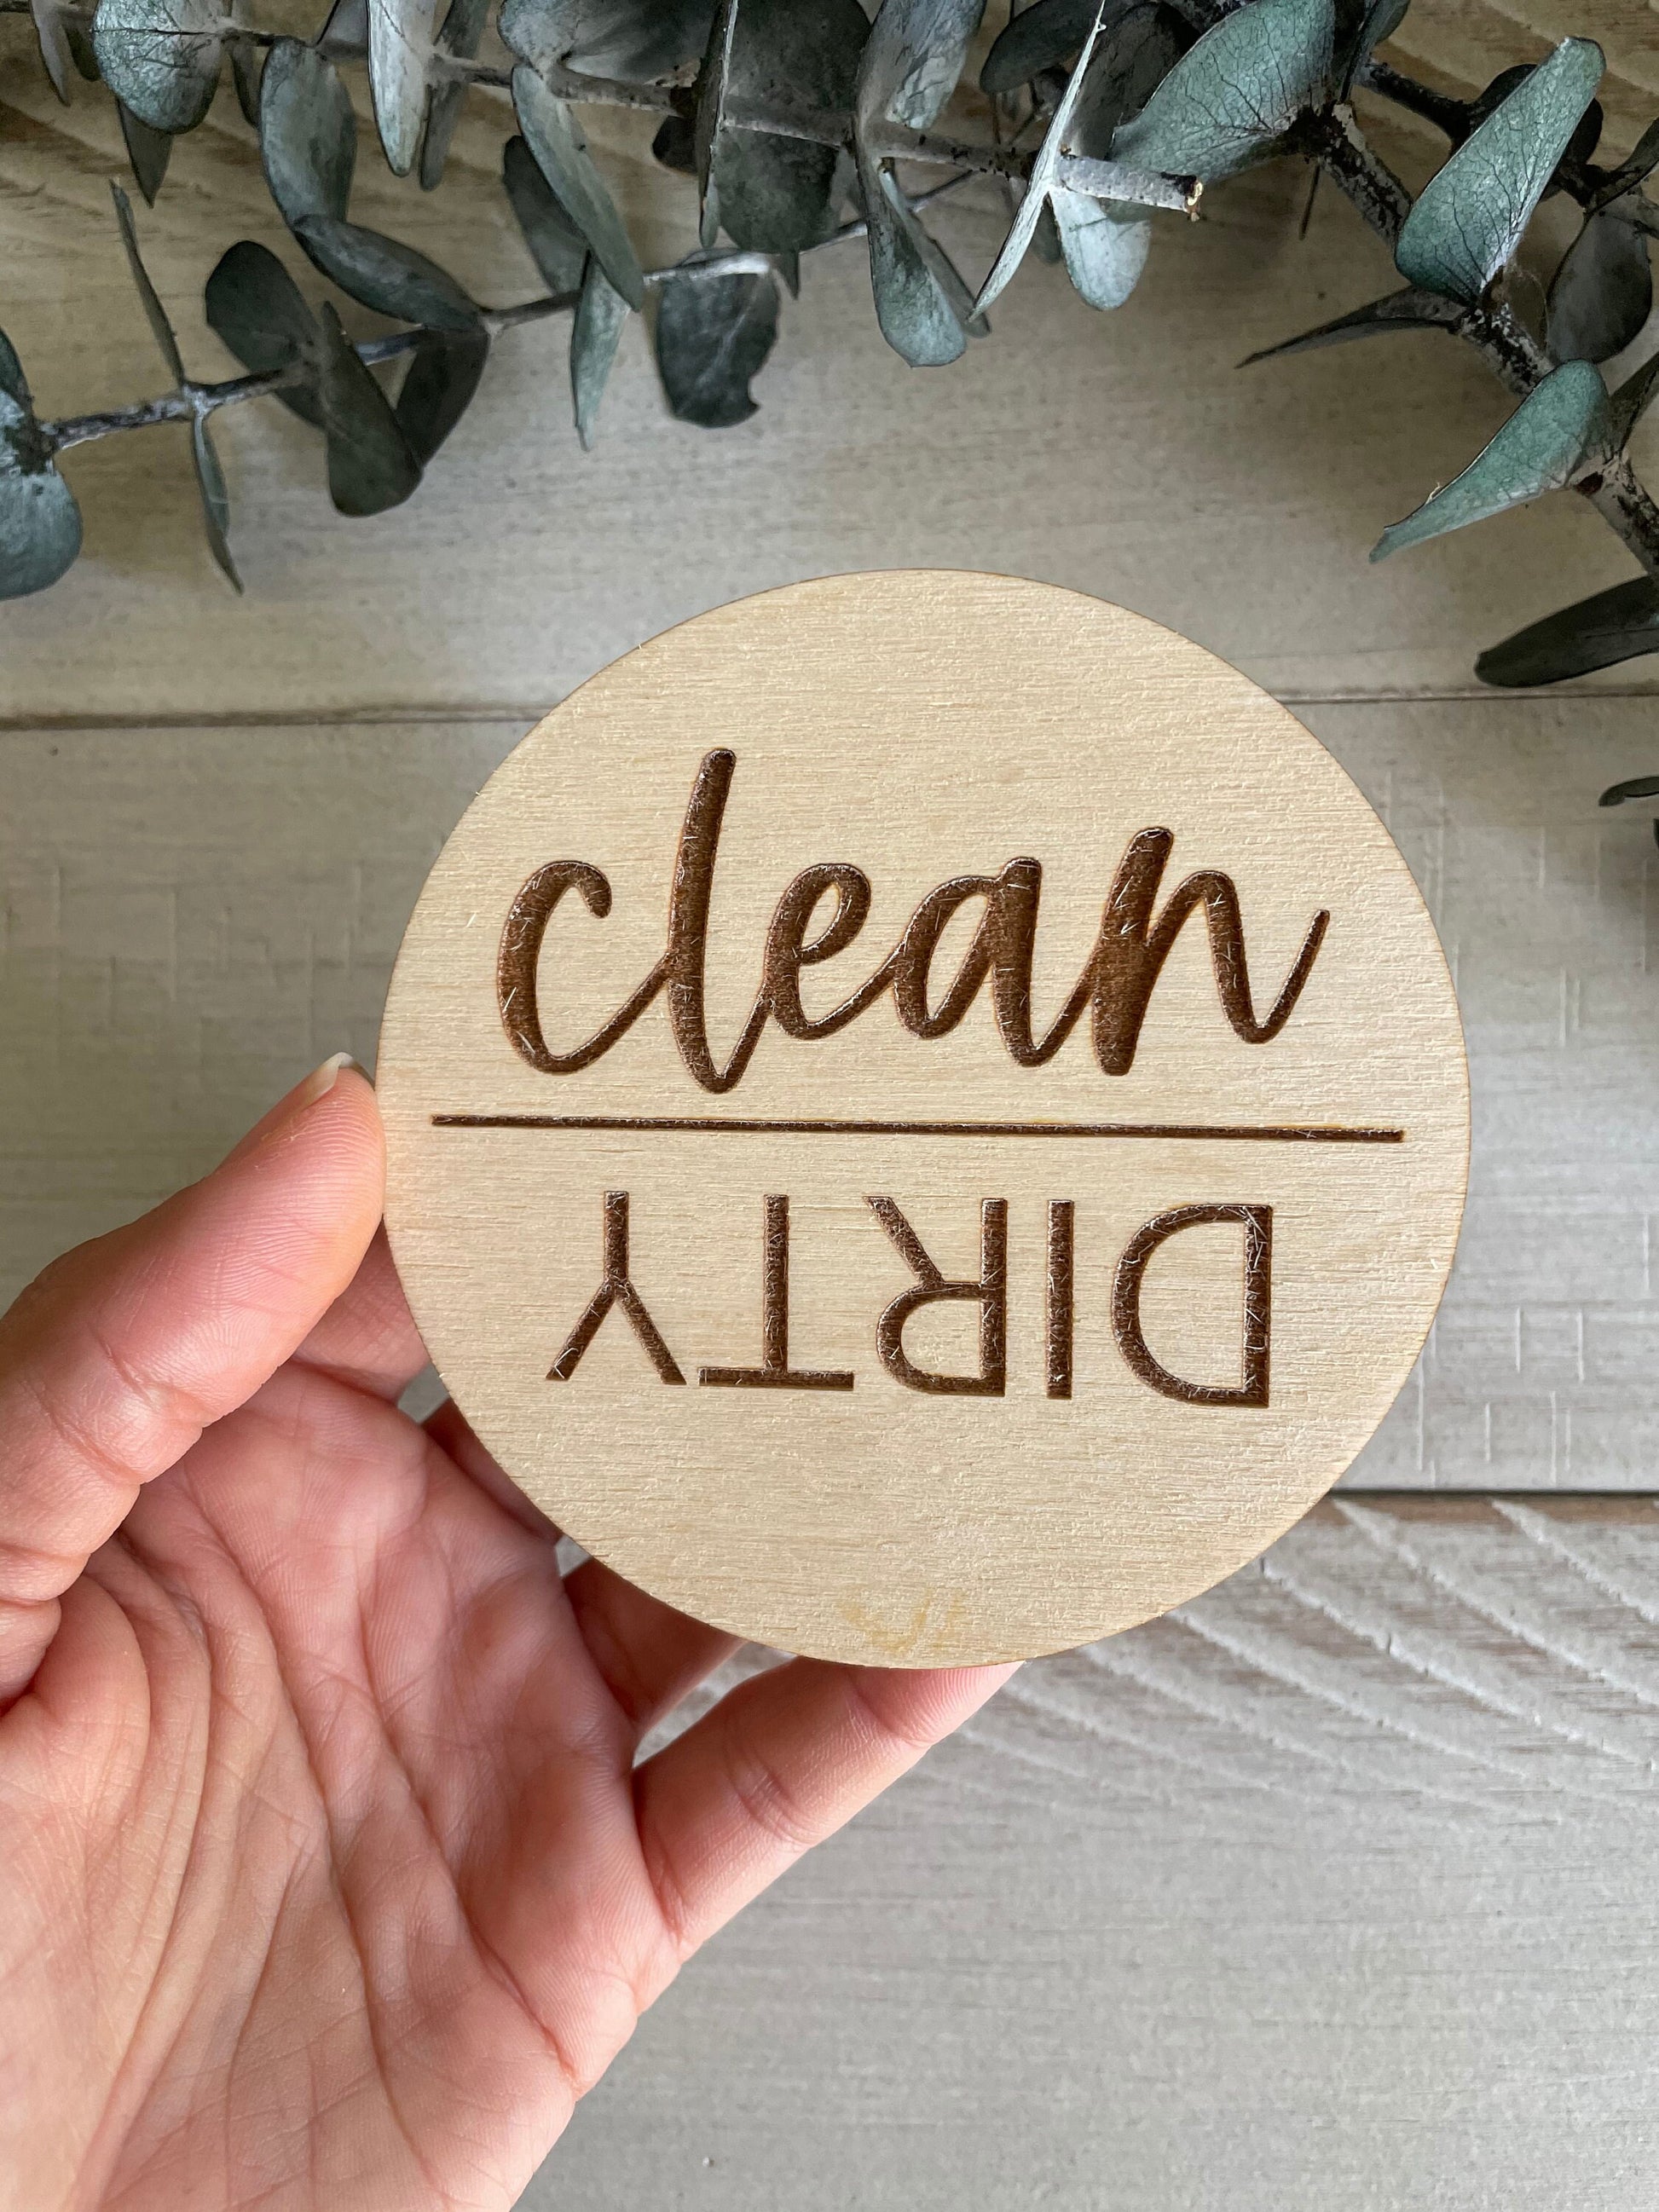 Dirty Clean Magnet Clean Dirty Dishwasher Magnet Wood Slice Clean